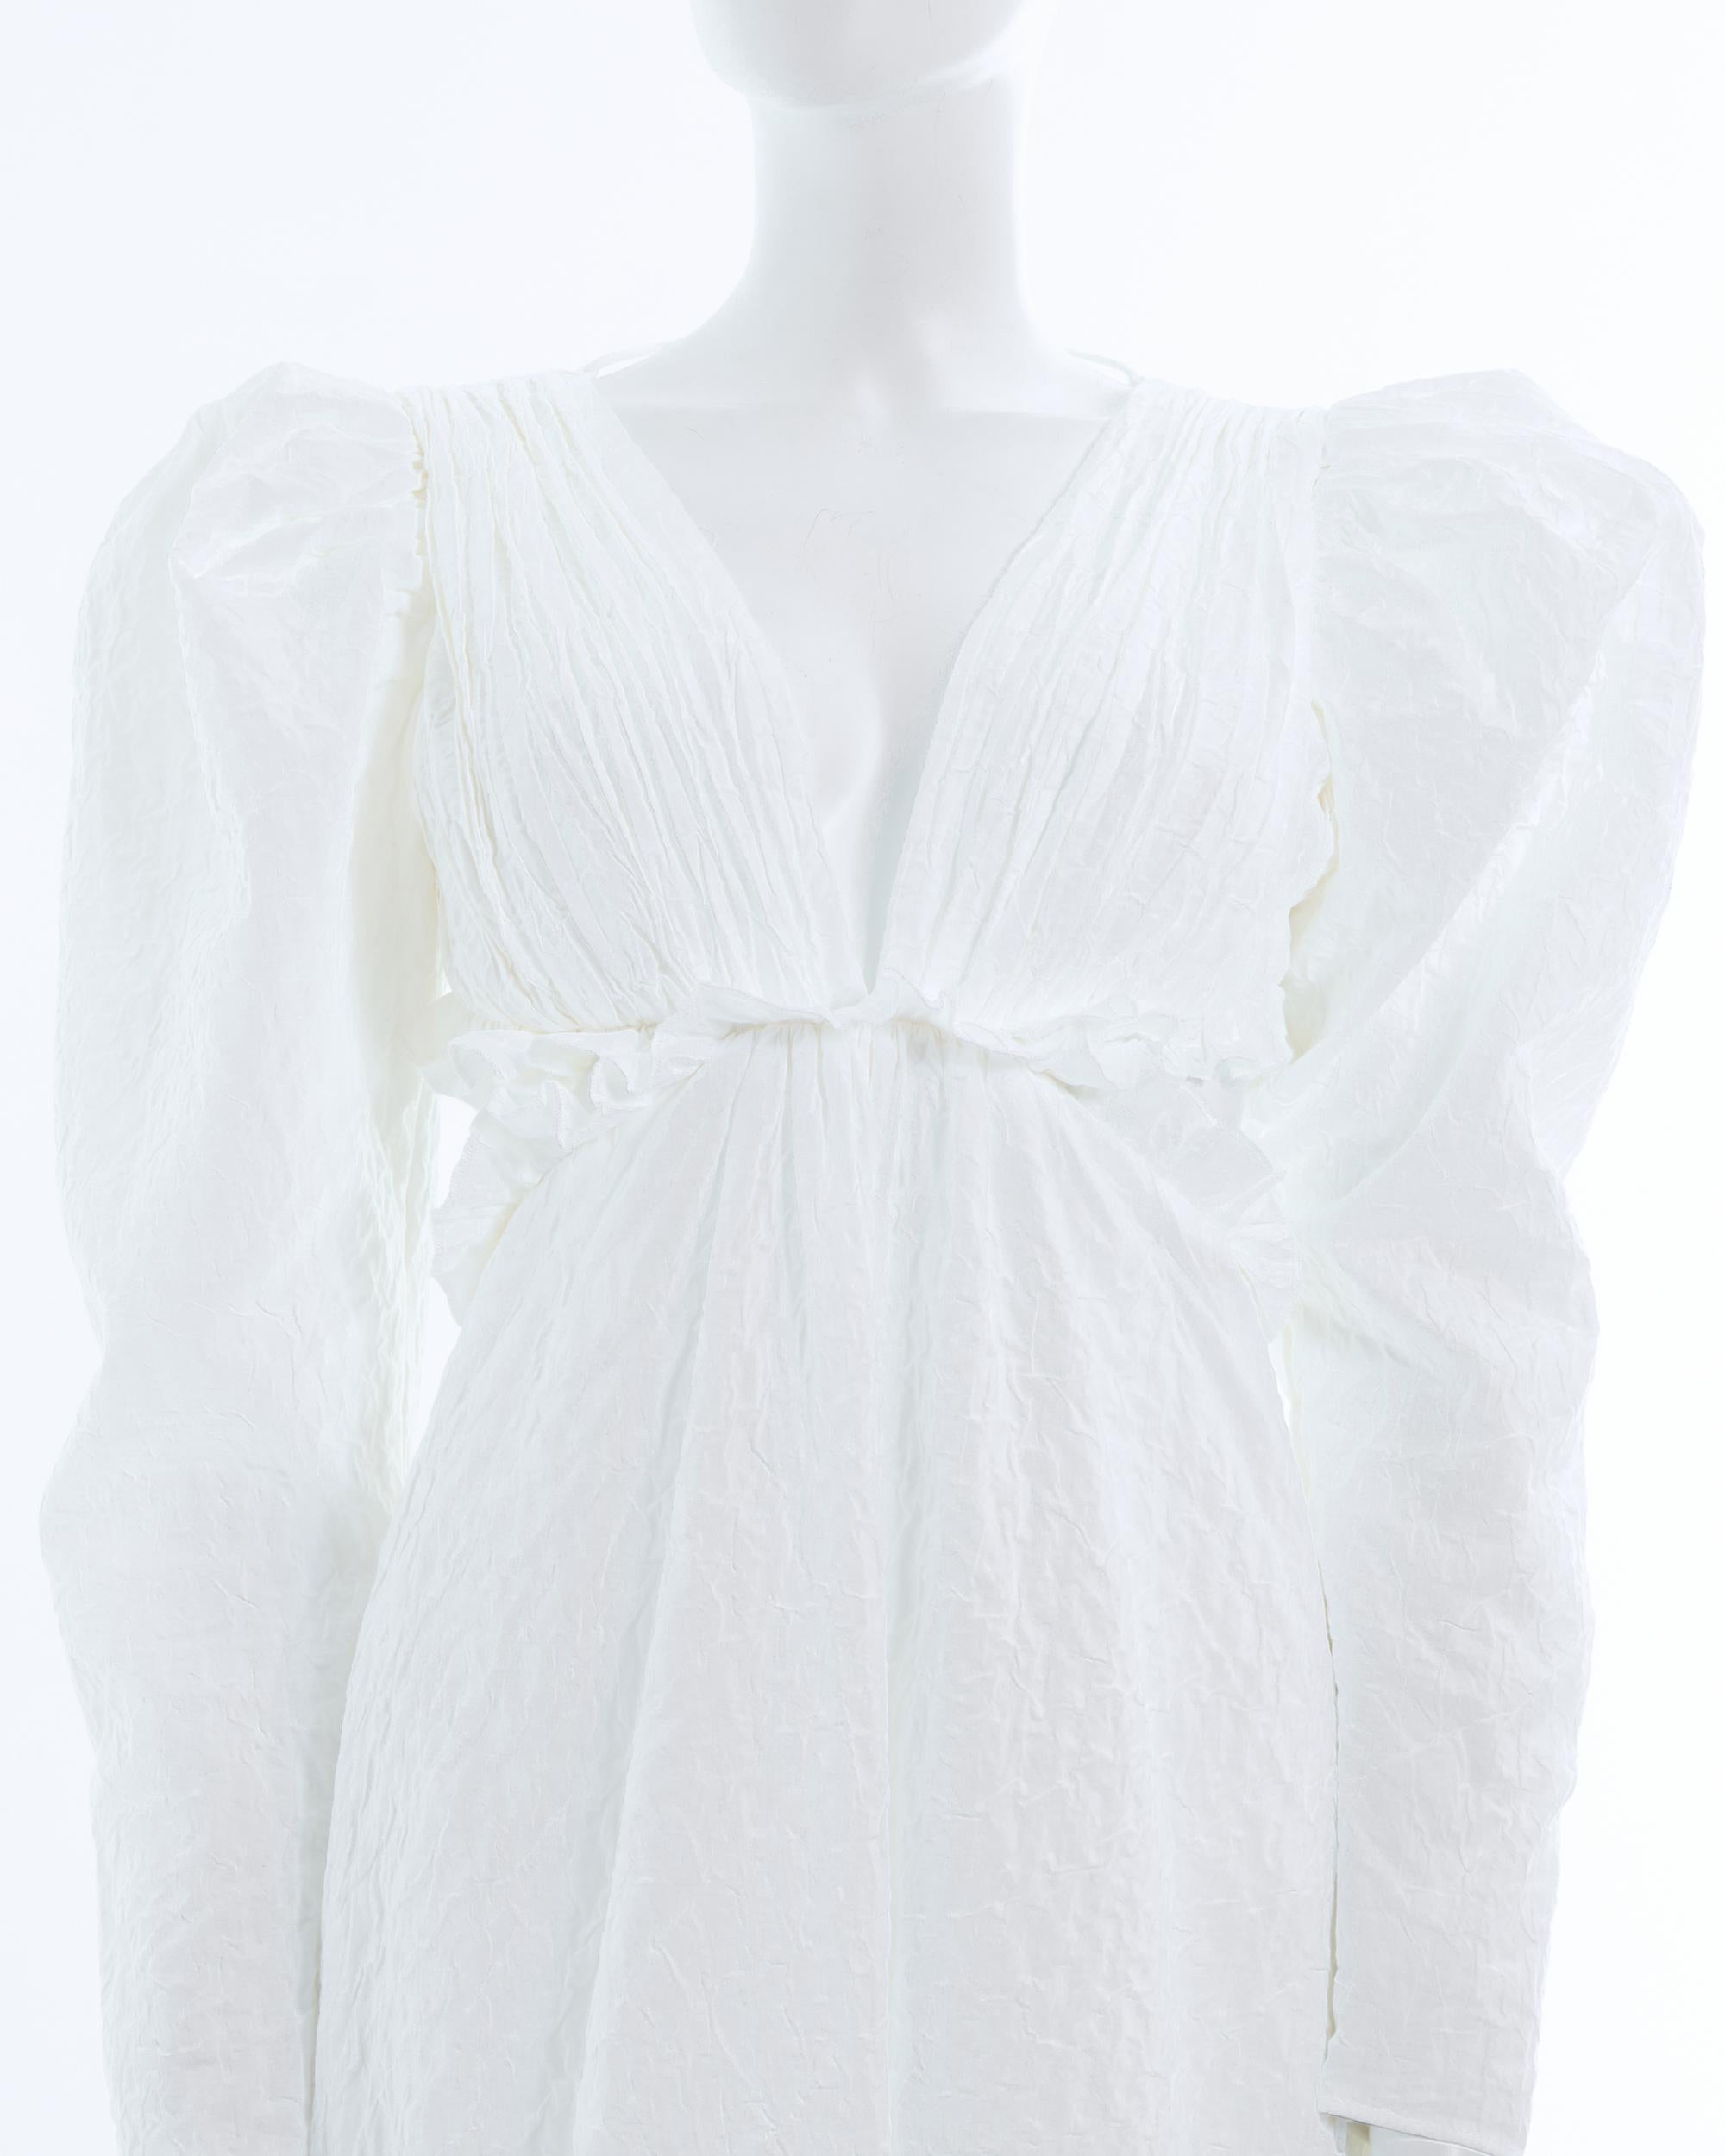 Yves Saint Laurent by Tom Ford S/S 2001 White cotton blend lace-up maxi dress  For Sale 6